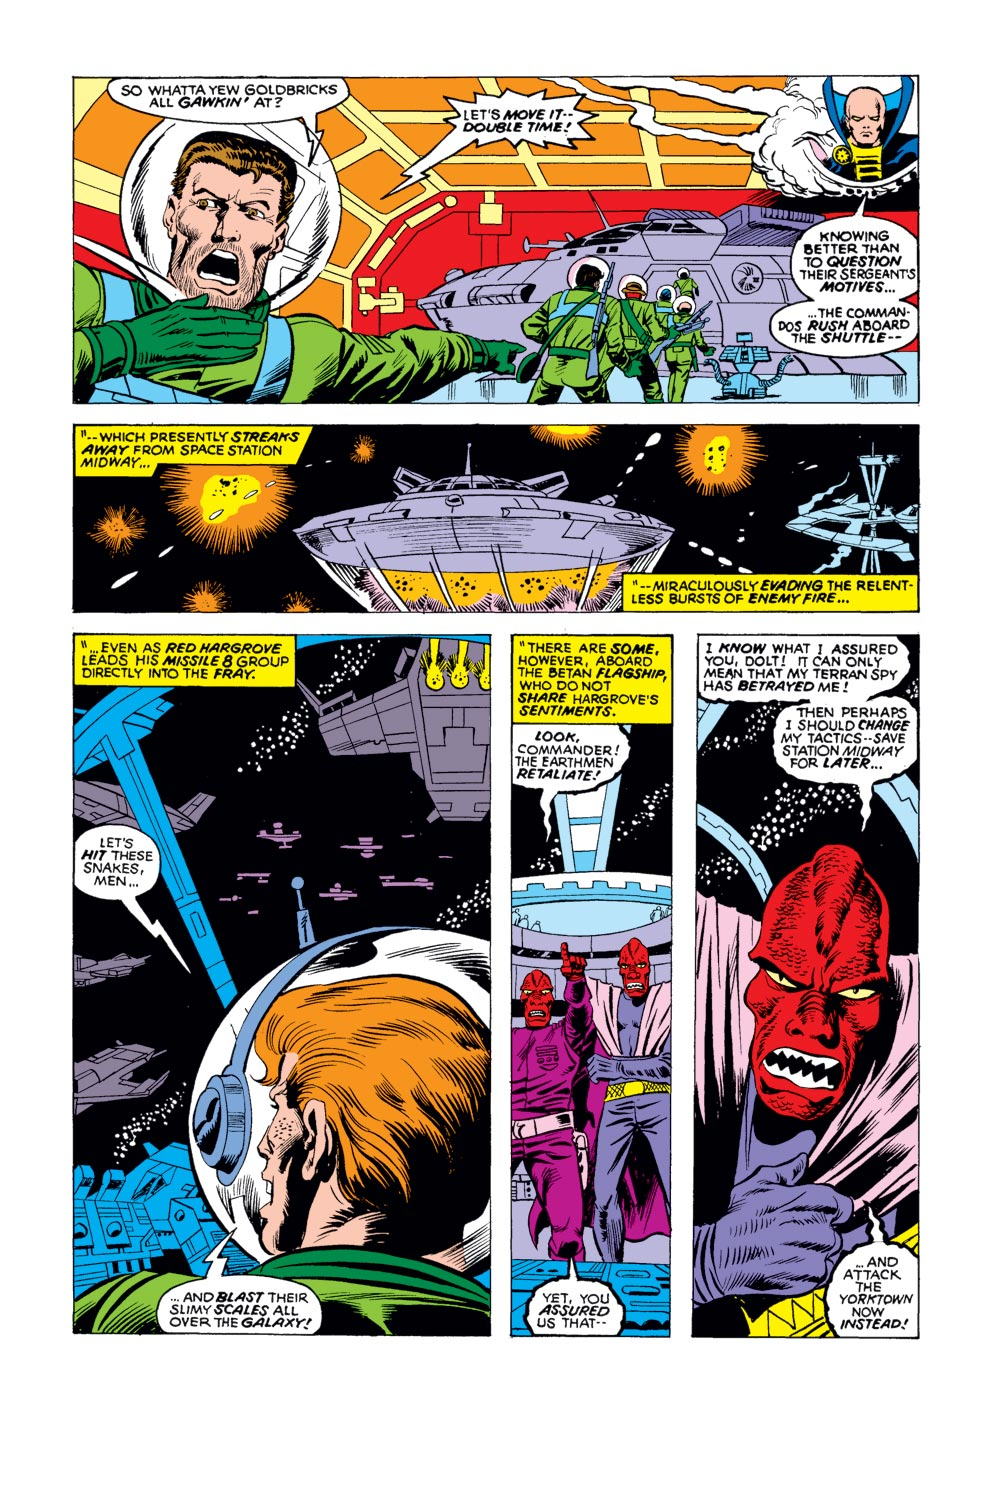 What If? (1977) issue 14 - Sgt. Fury had Fought WWII in Outer Space - Page 26